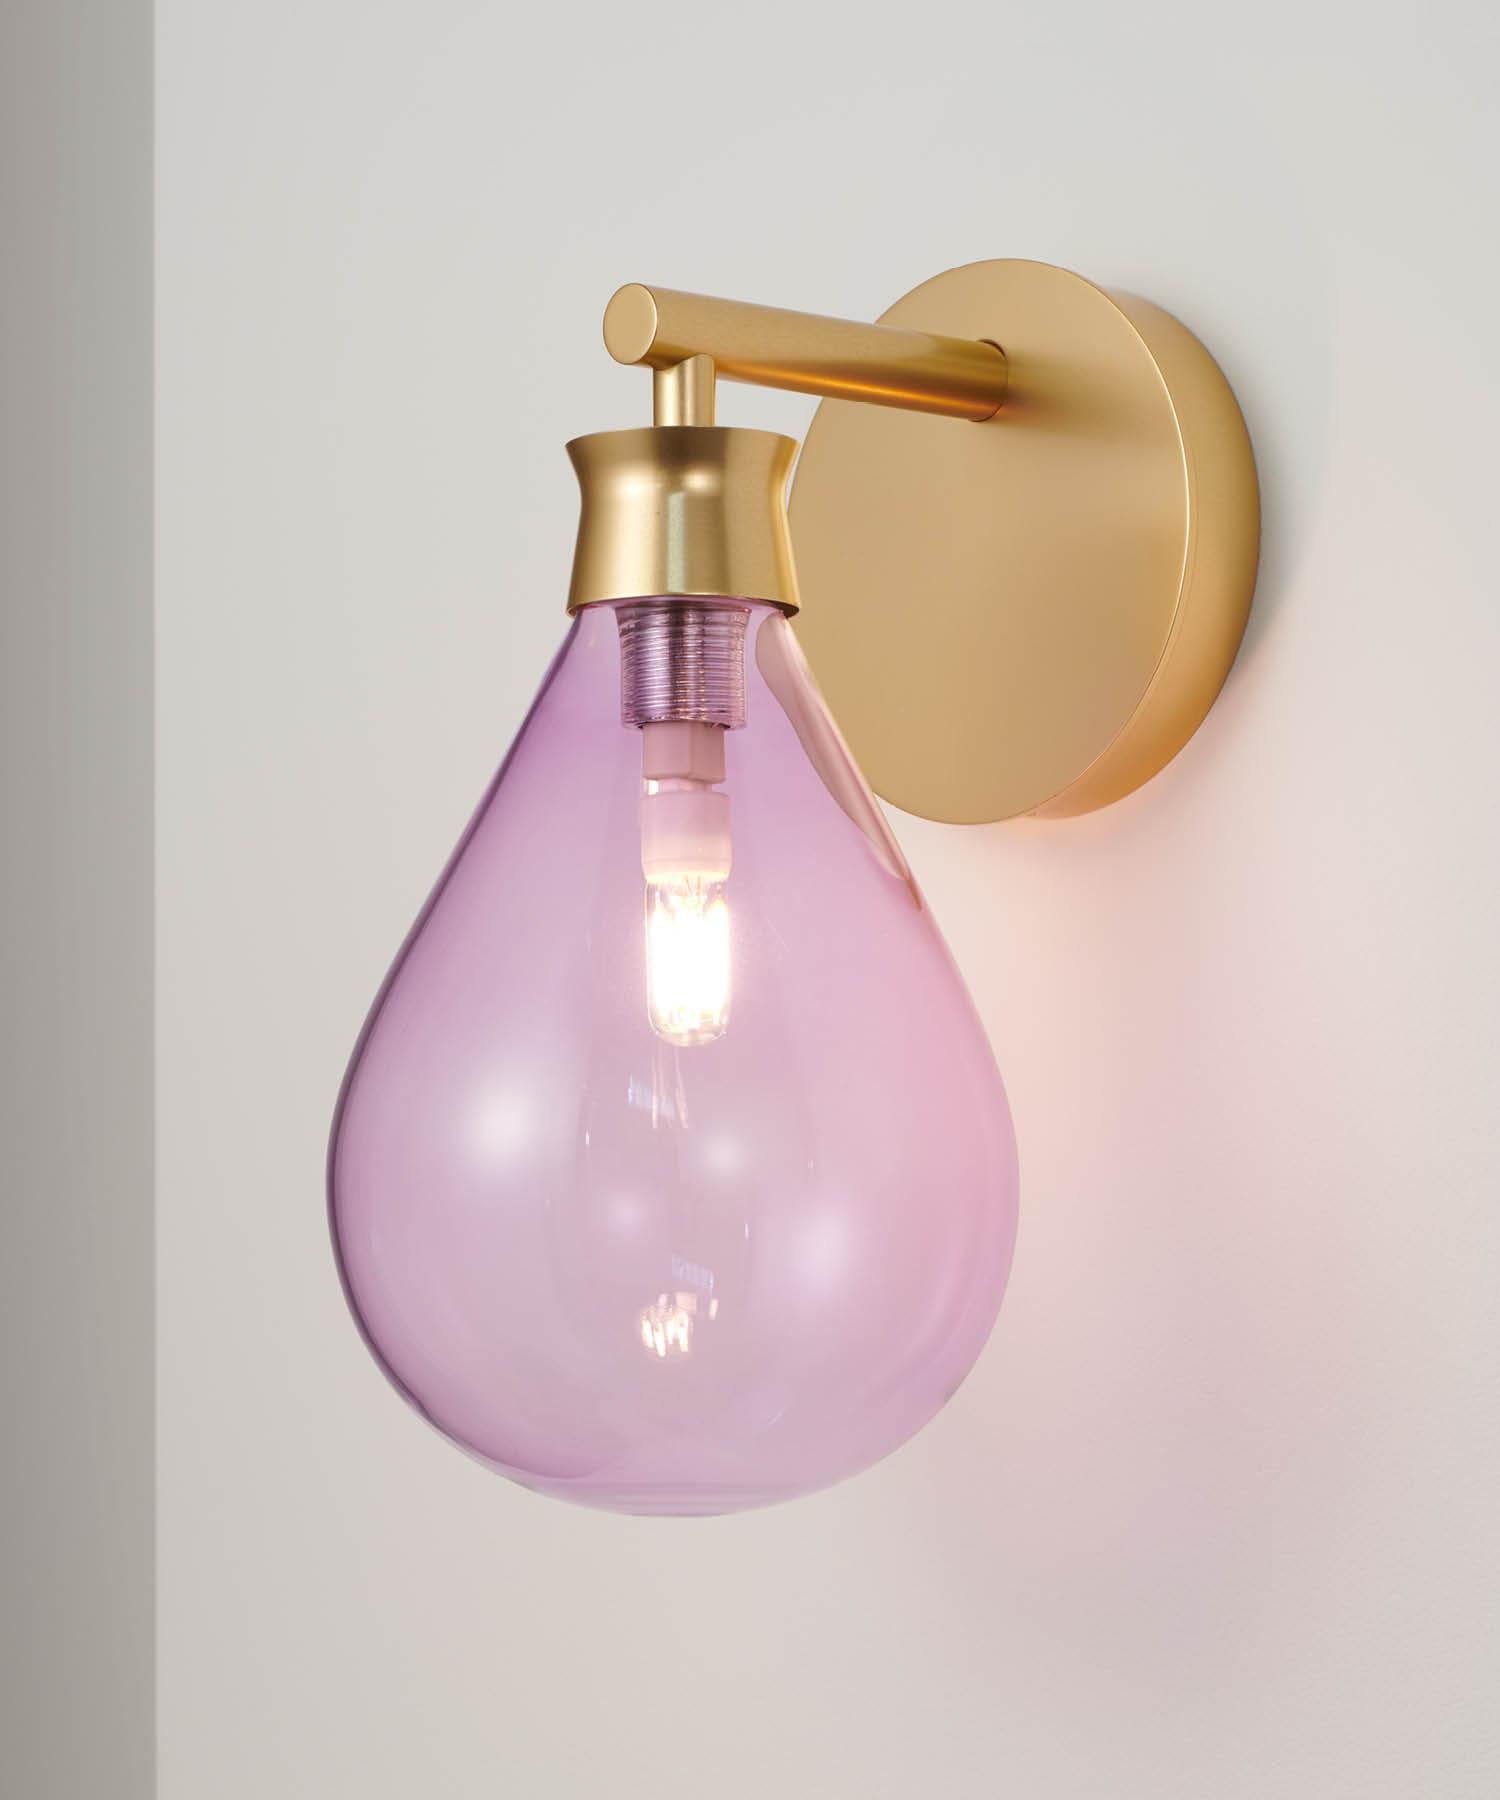 Contemporary and refined, the Cintola Wall Light combines hand-blown glass with a precision-machined aluminium body.
Available in a range of seven glass colours and three metal finishes, the wall light can also be mounted in two different